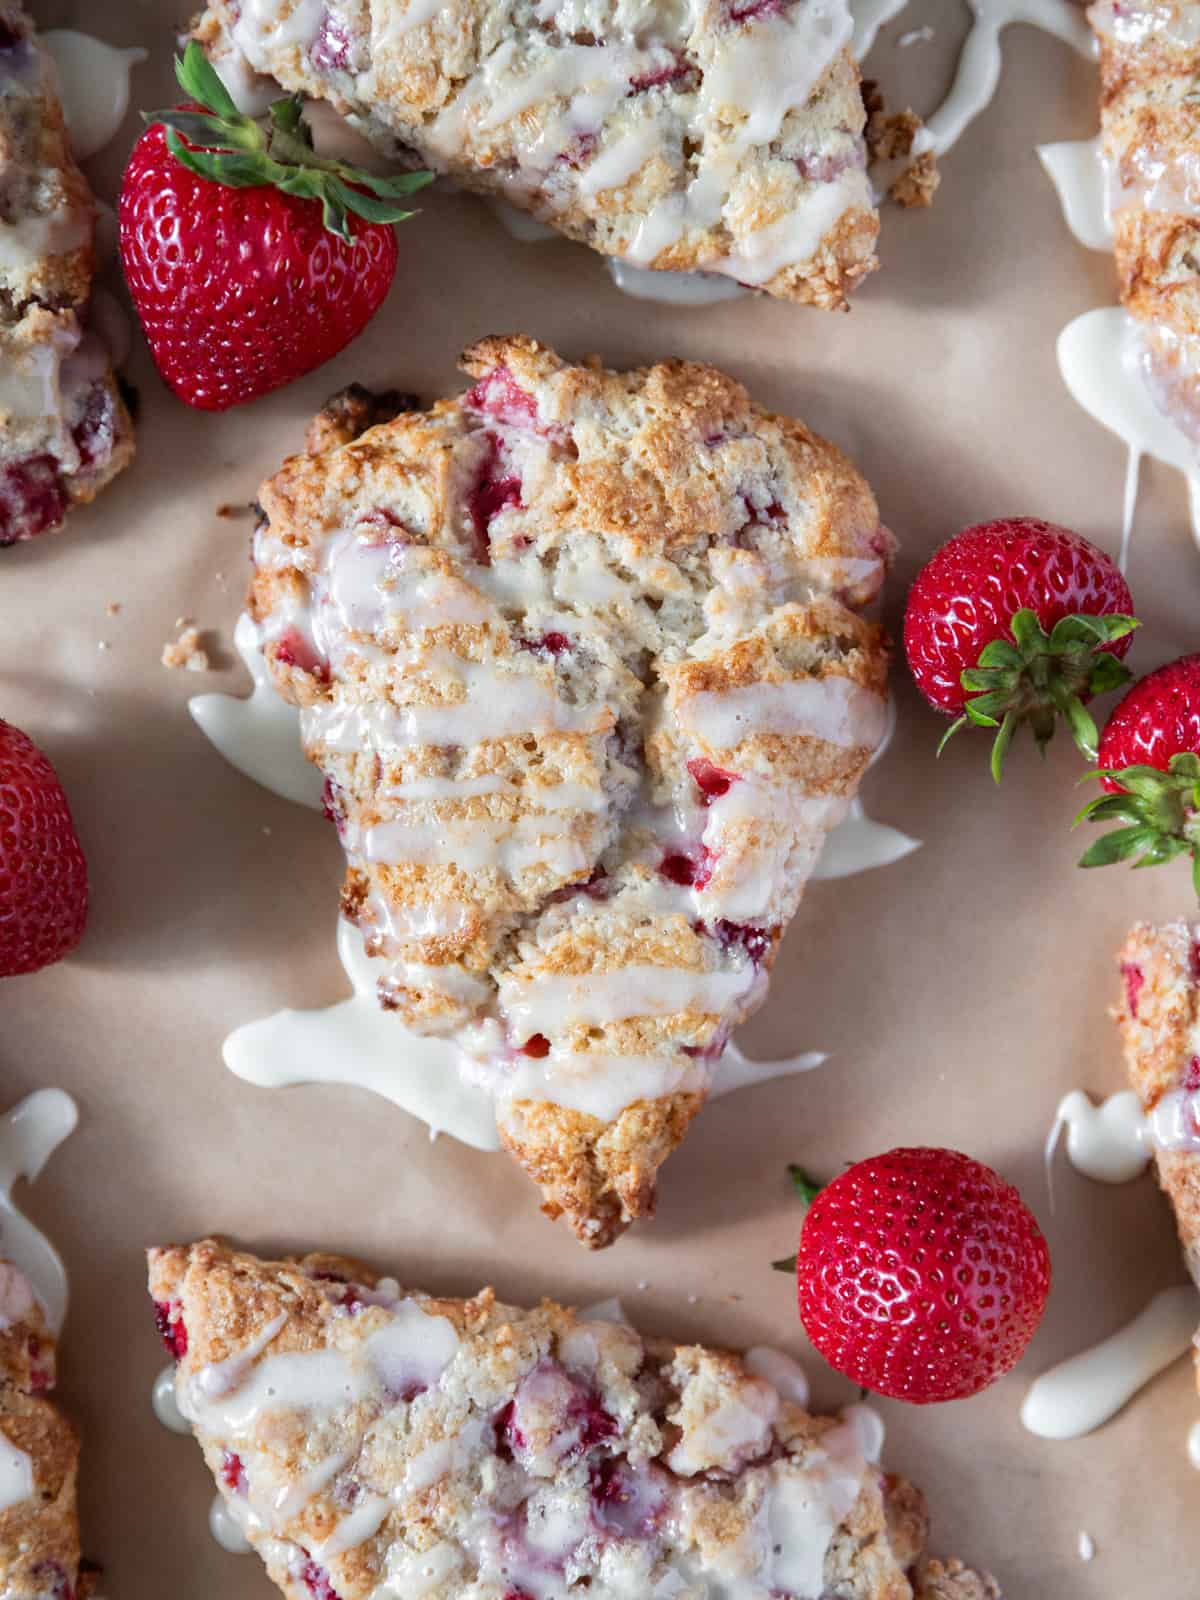 strawberry scones drizzled with vanilla glaze and surrounded by fresh strawberries.